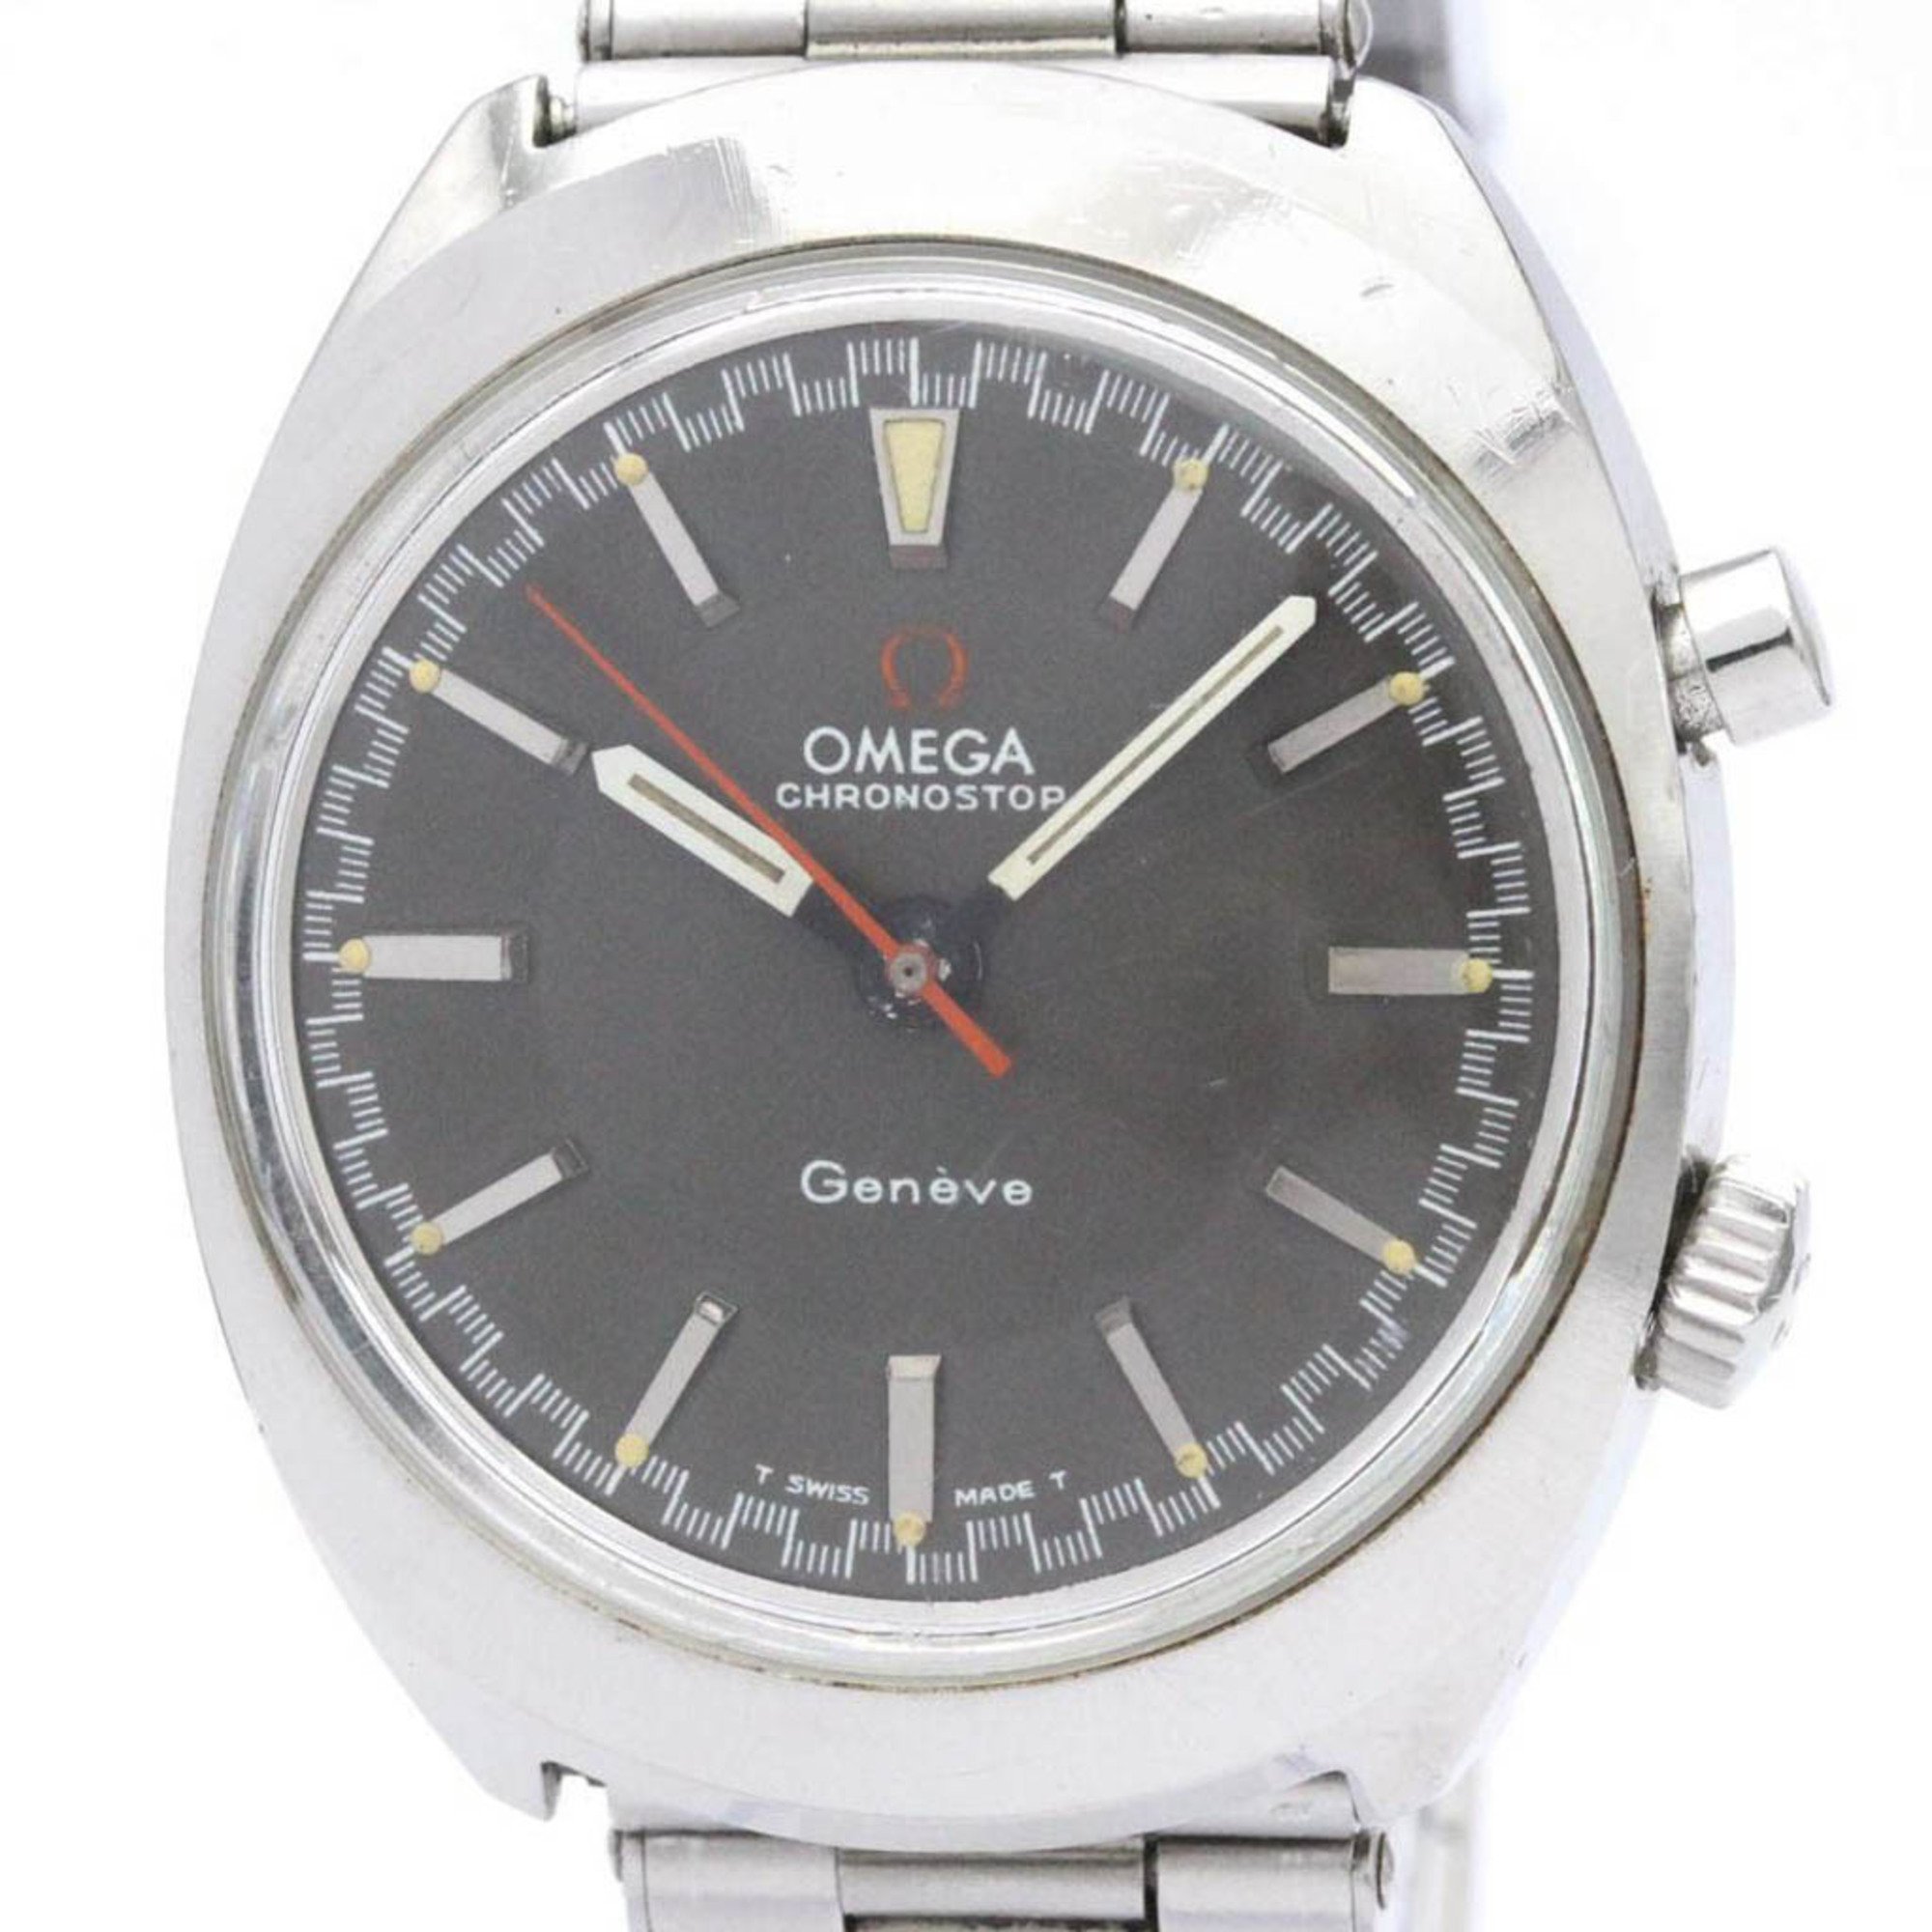 Vintage OMEGA Chronostop Cal 865 Steel Automatic Mens Watch 145.009 BF559640